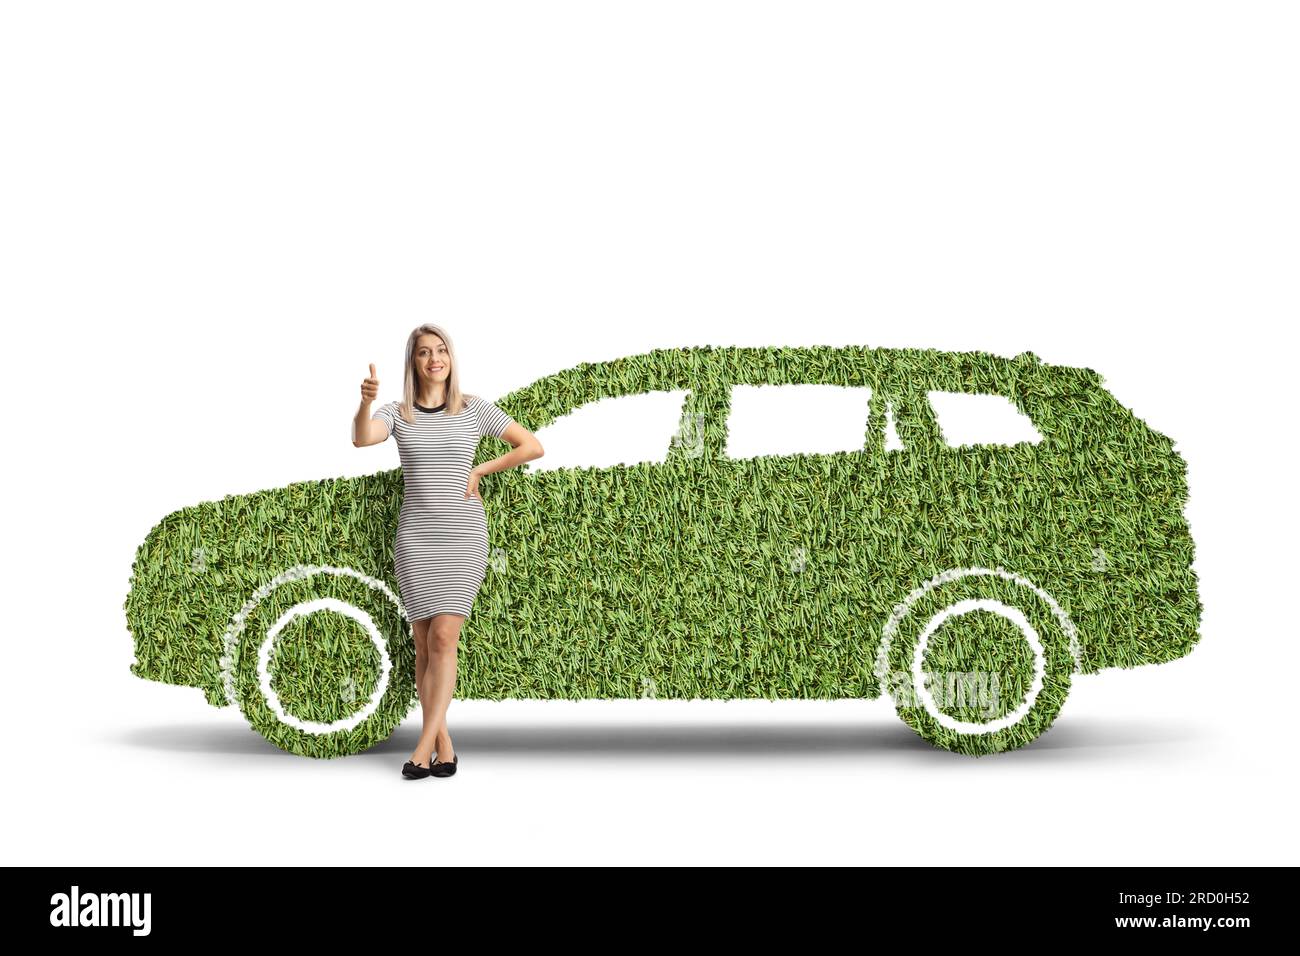 Full length portrait of a woman leaning on a green car made of grass and gesturing thumbs up isolated on white background Stock Photo